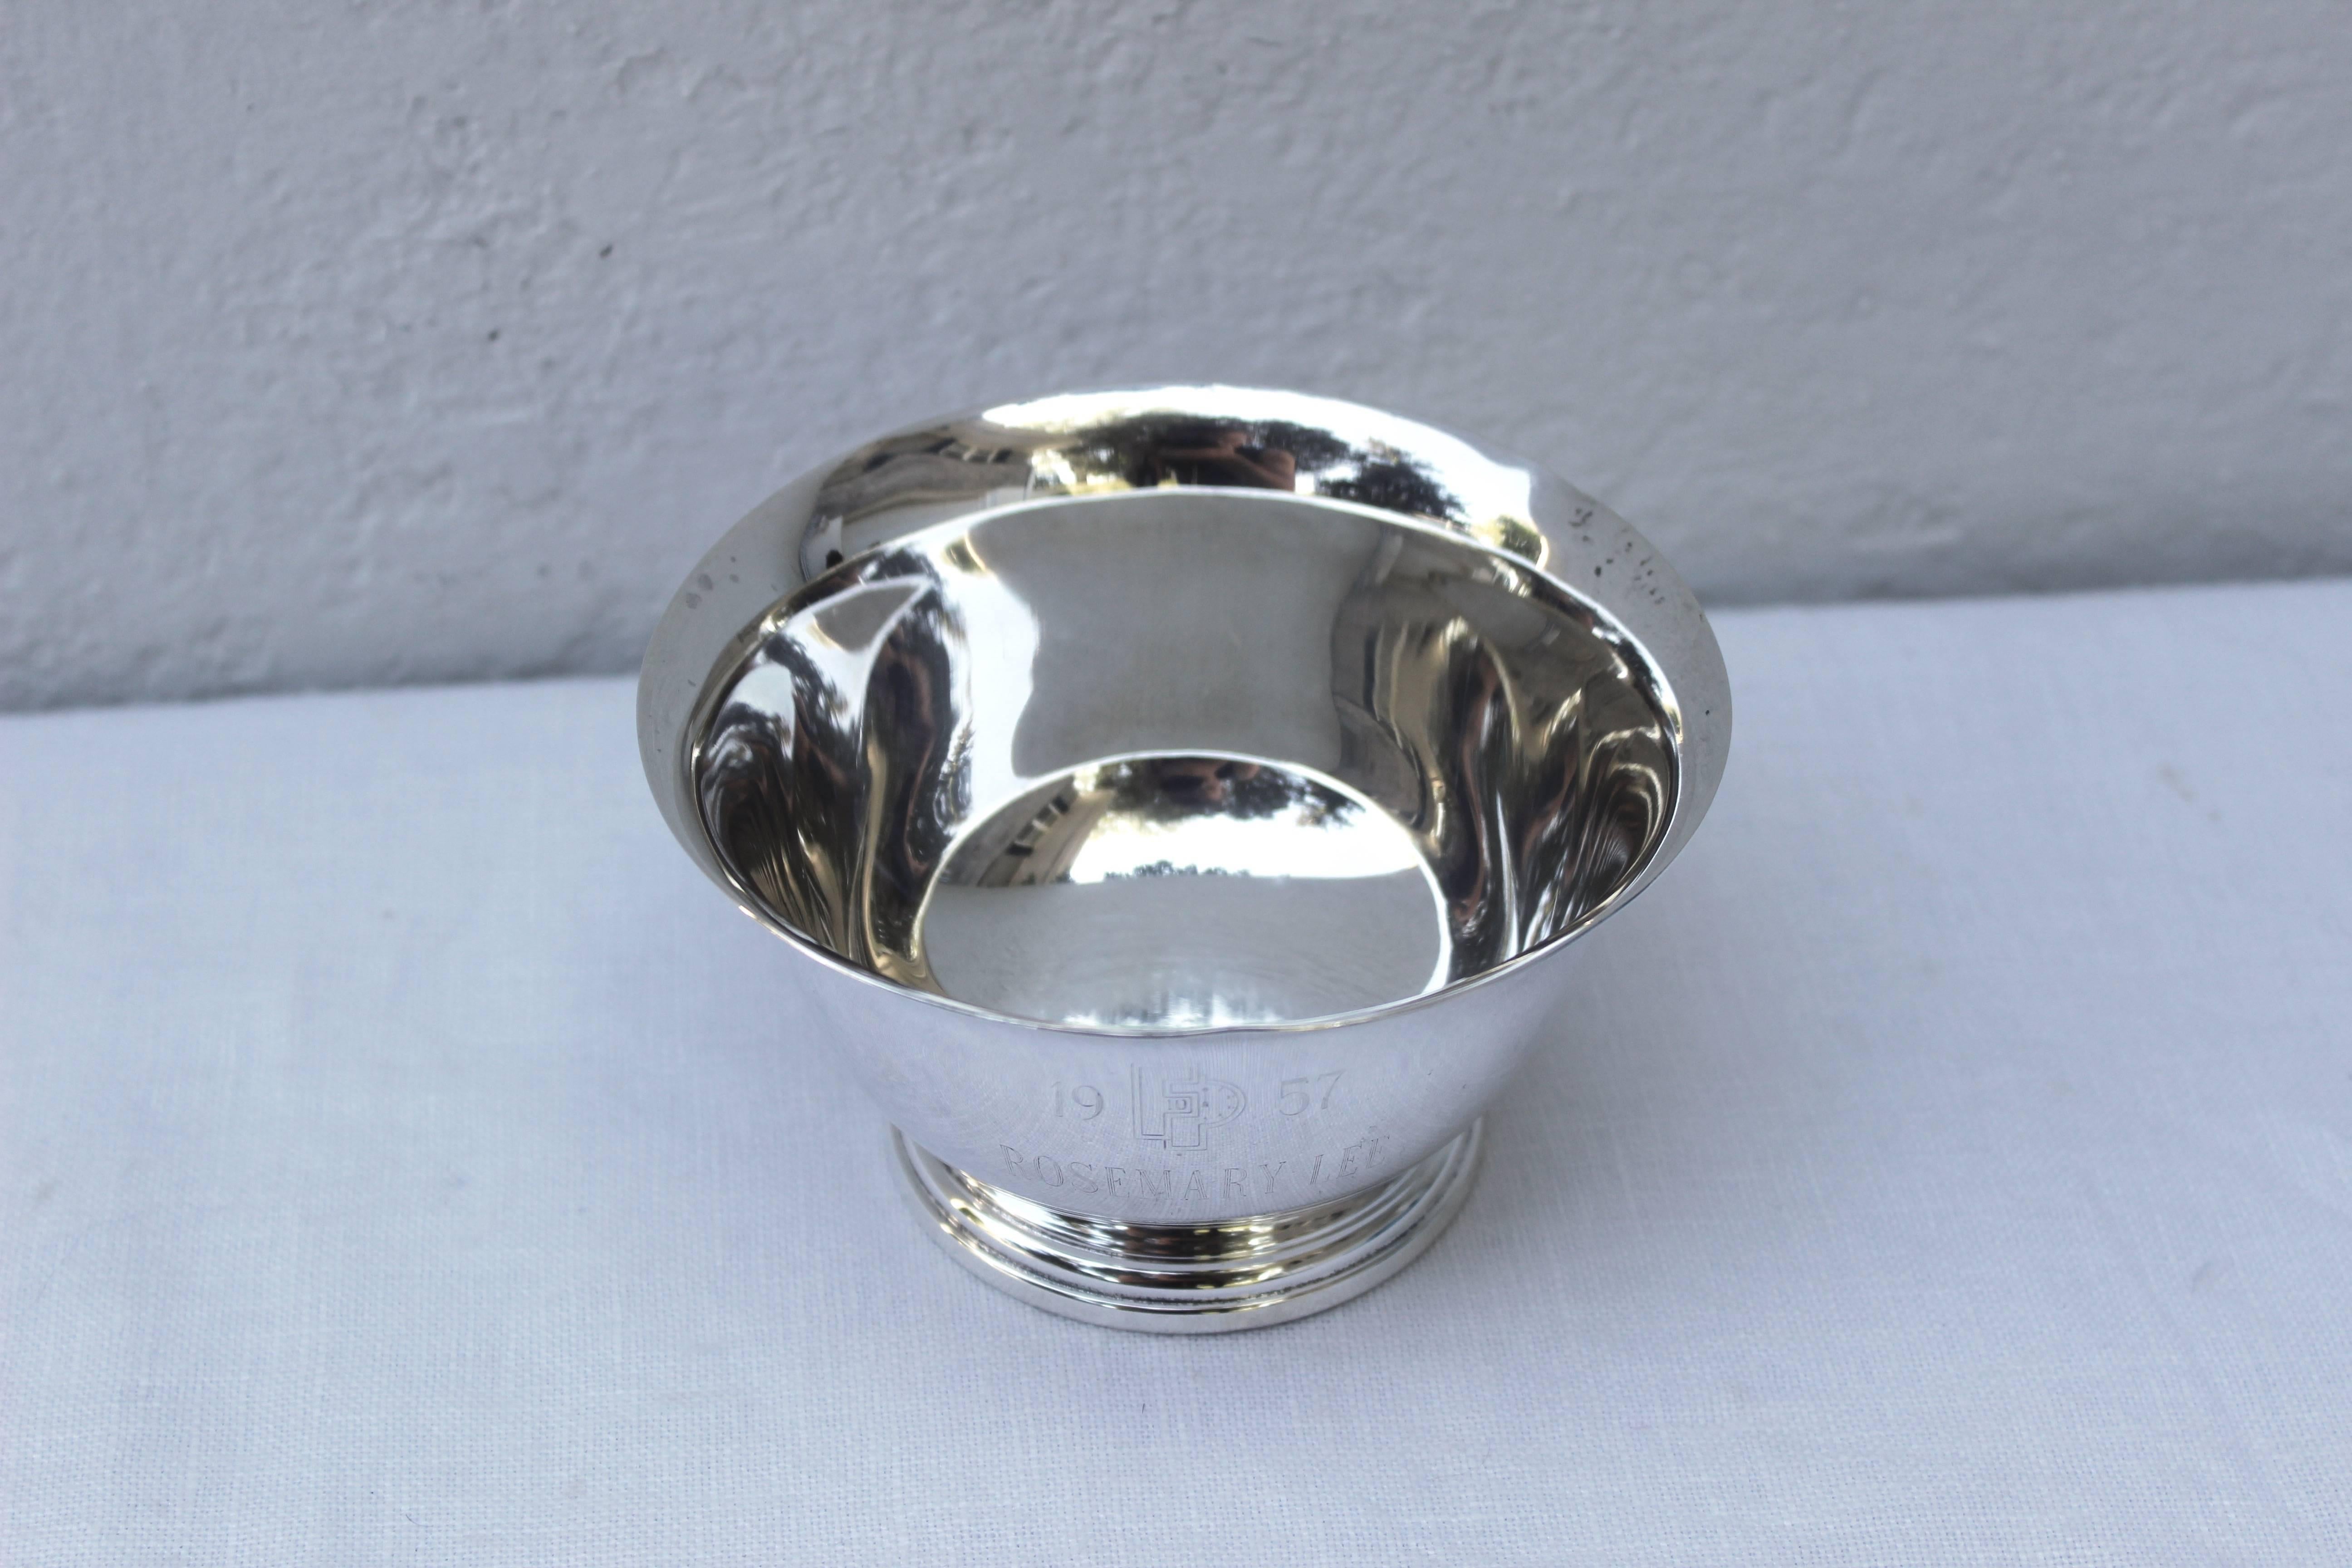 Reproduction of Paul Revere sterling silver bowl. Engraved 